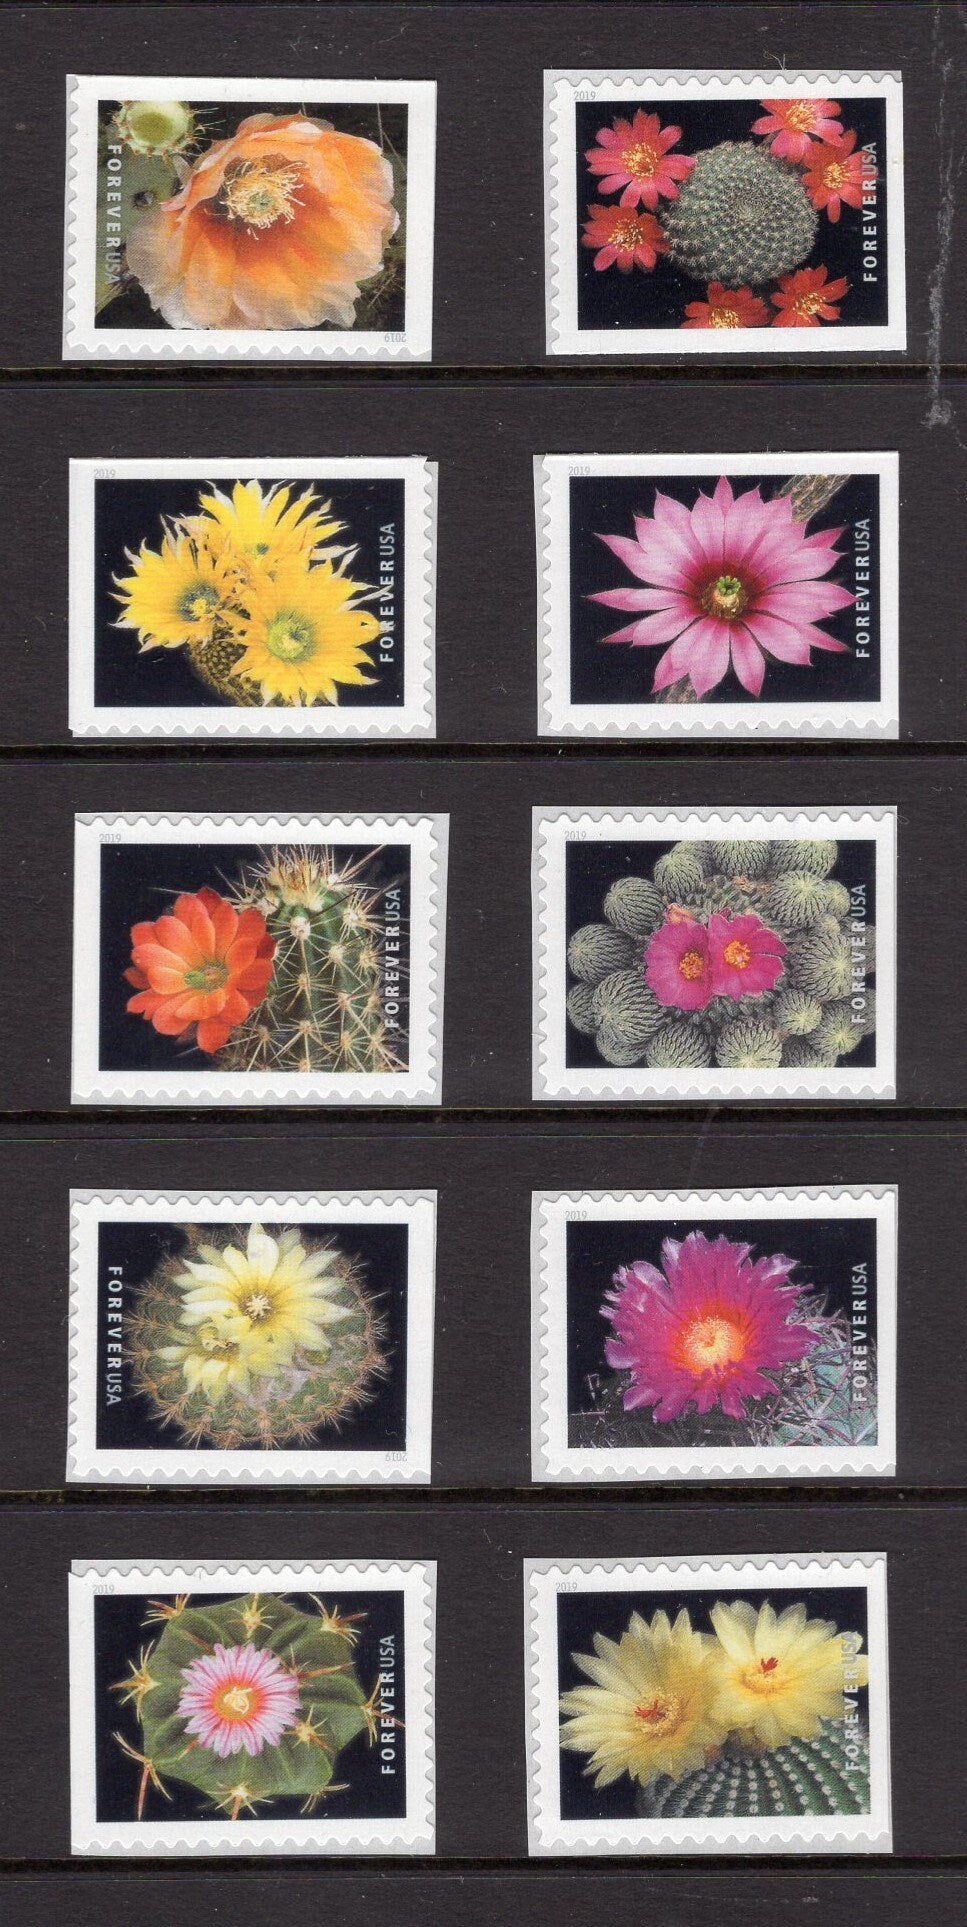 10 FLOWERING CACTUS FOREVER USA Postage Stamps Great Wedding Bright, Post Office Fresh - Issued in 2019 - s5350 -